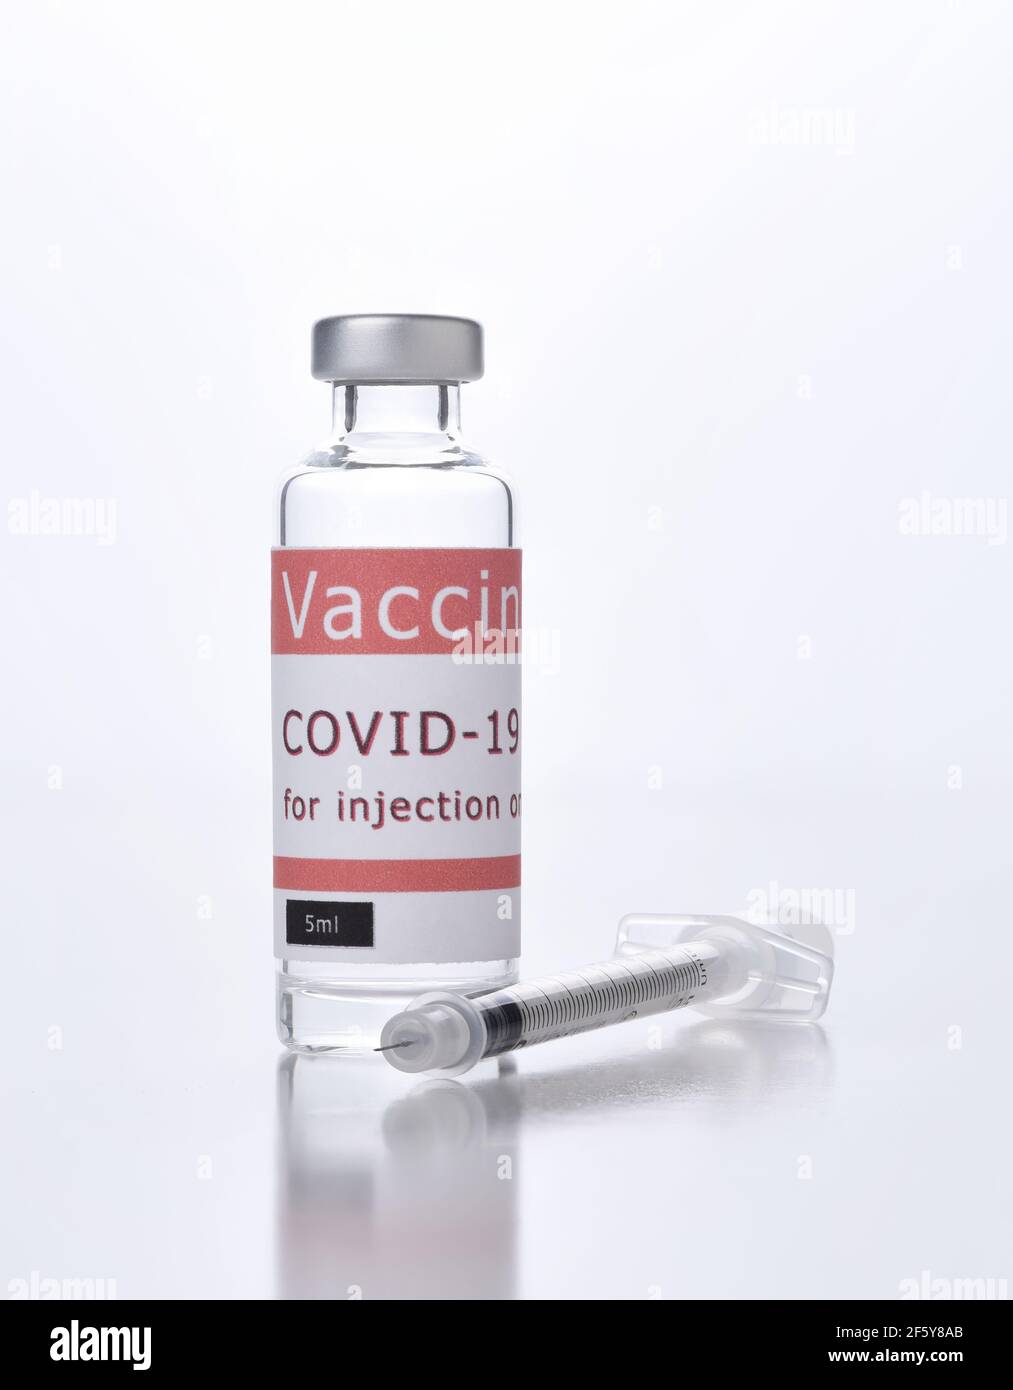 Closeup of a Covid-19 Vaccine vial and syringe on white. Stock Photo